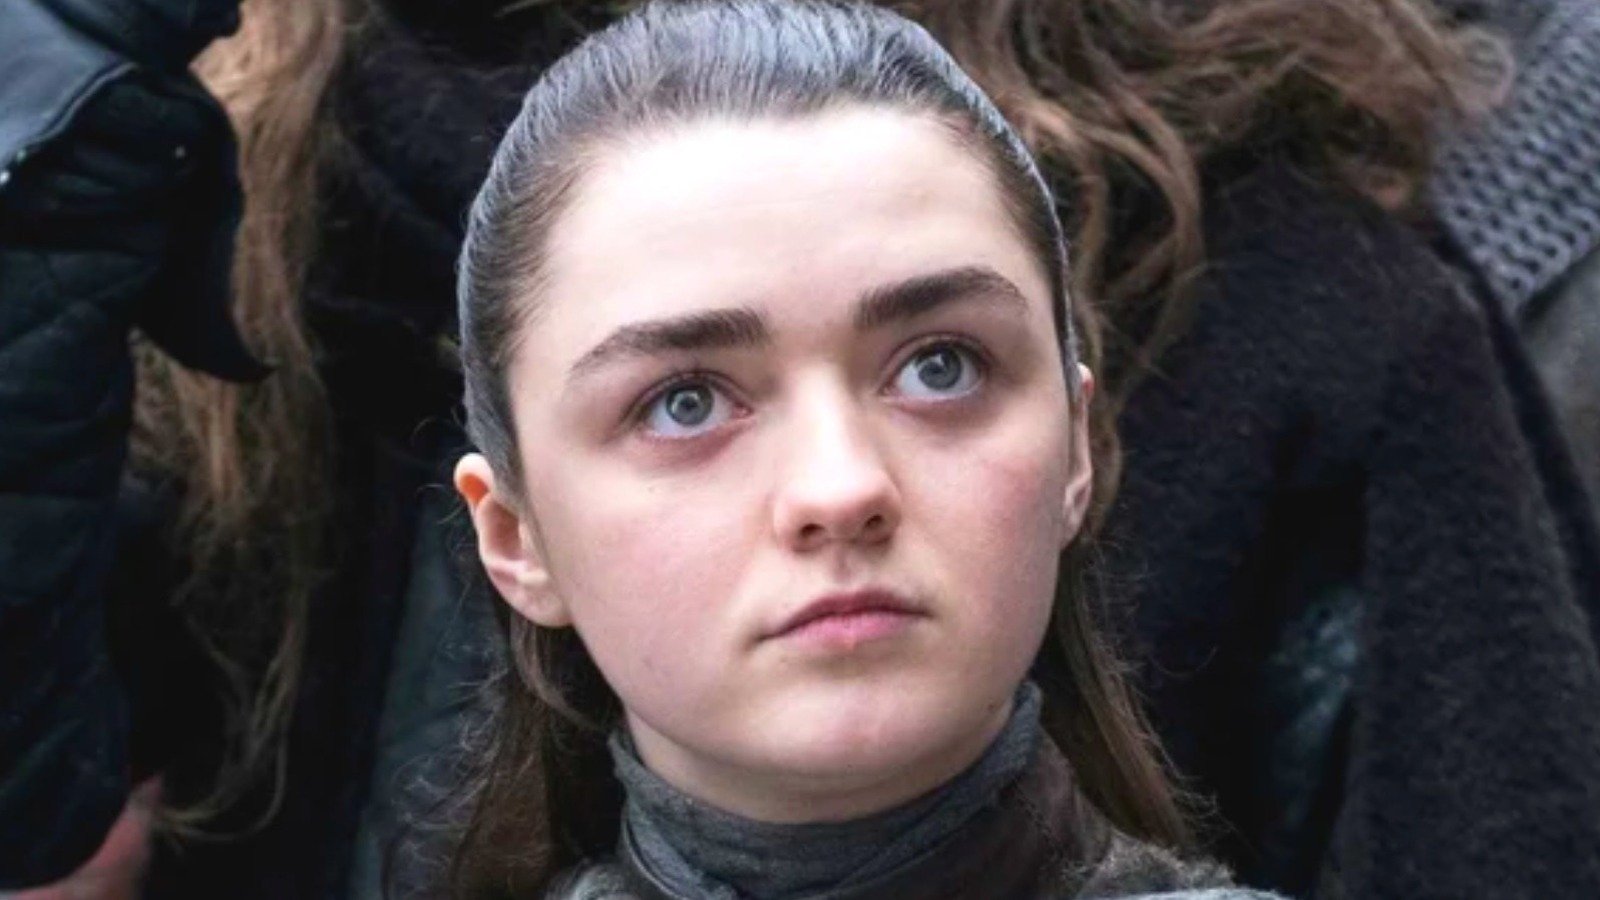 The Arya Stark Scene In Game Of Thrones That Went Too Far